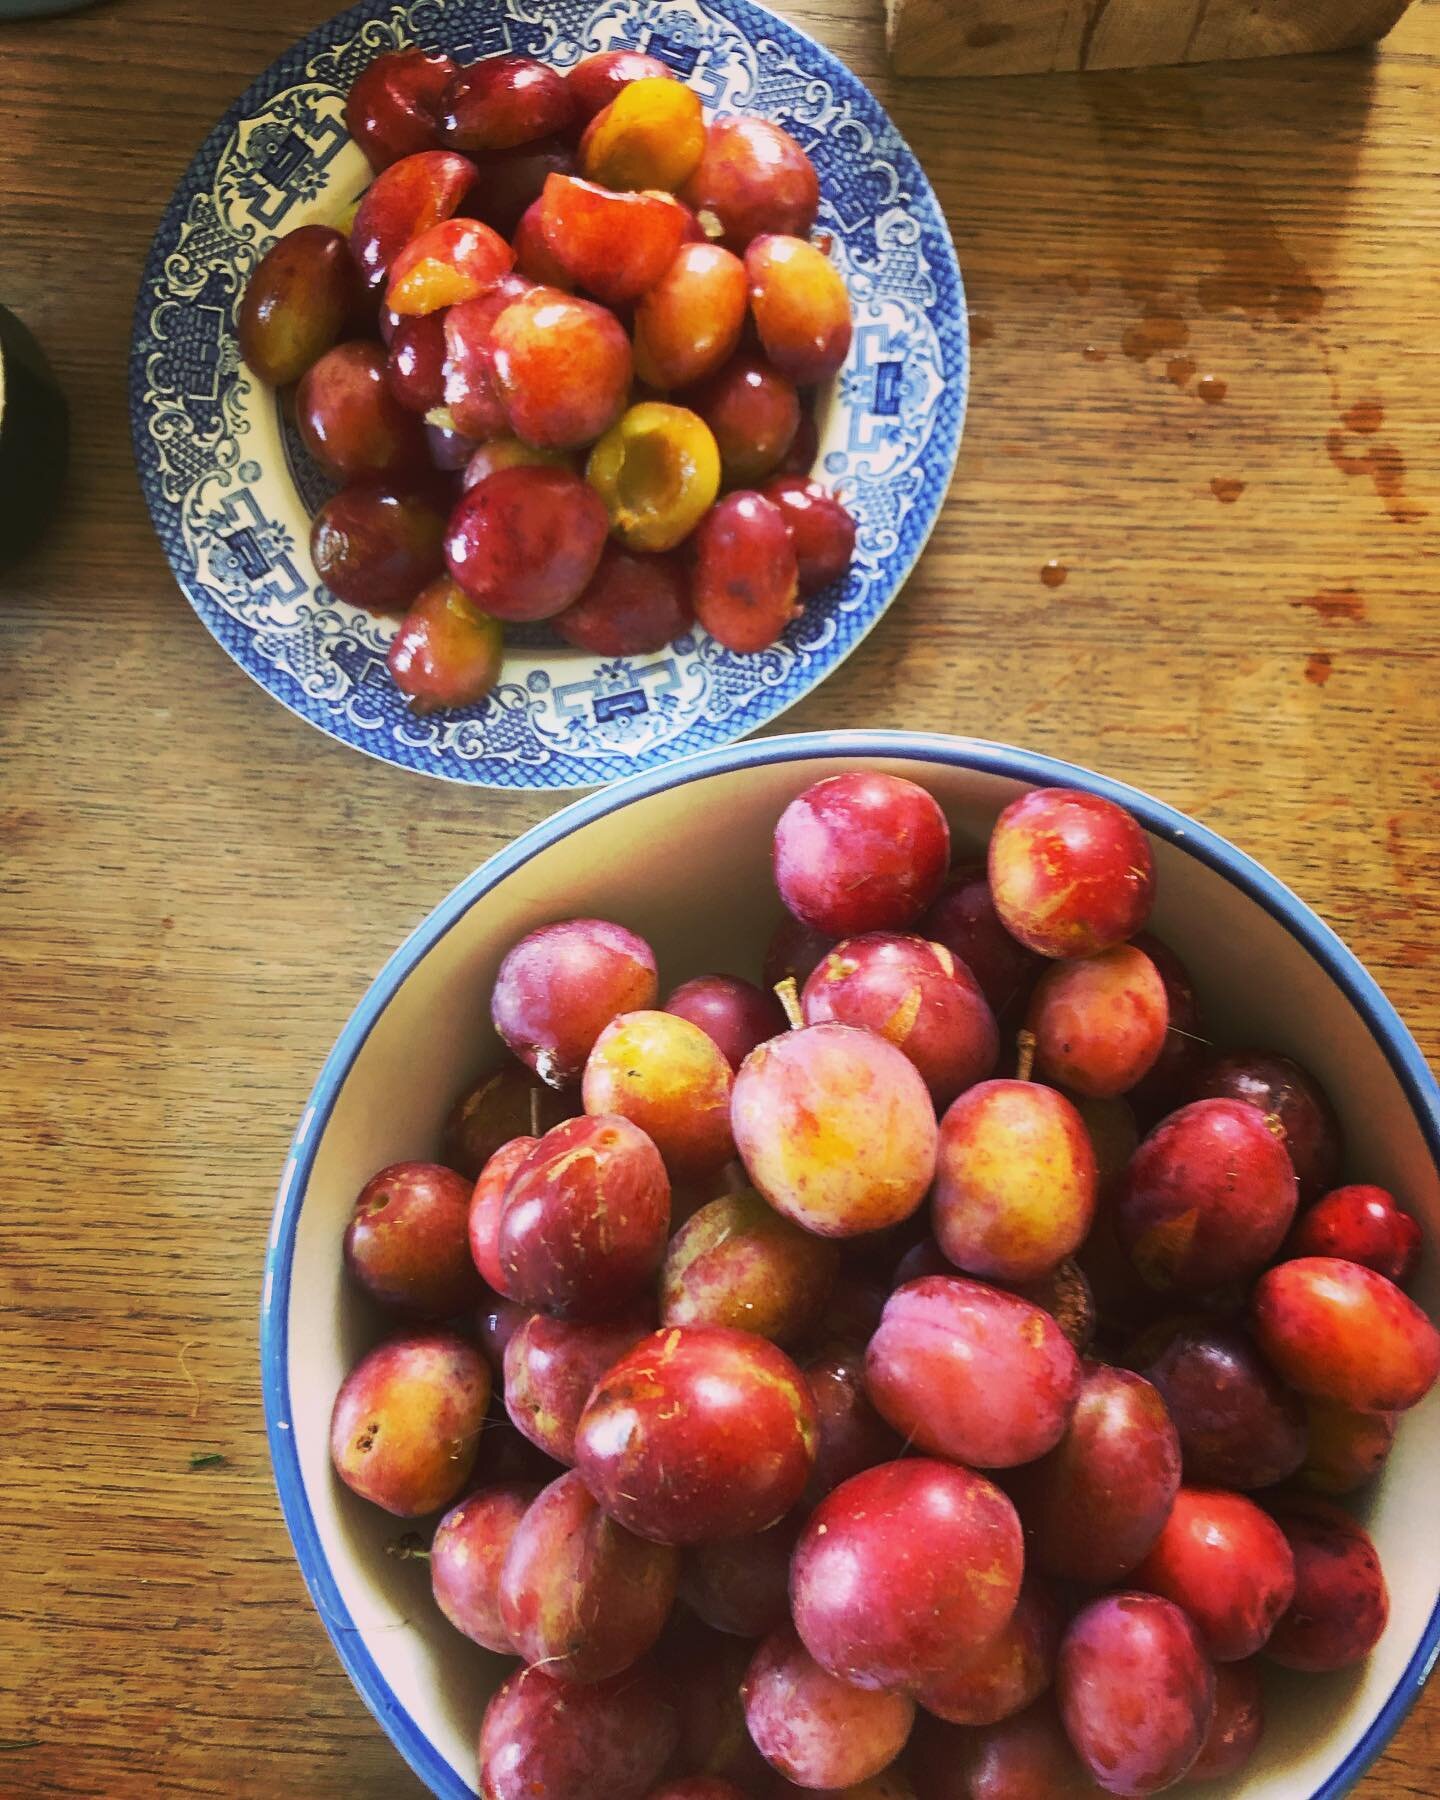 When we first moved to the farm four years ago there was an ENORMOUS bay tree dominating the garden and when I gave it a very necessary haircut I discovered a little plum tree below. The first year of exposure it yielded nil, next year, one, last yea